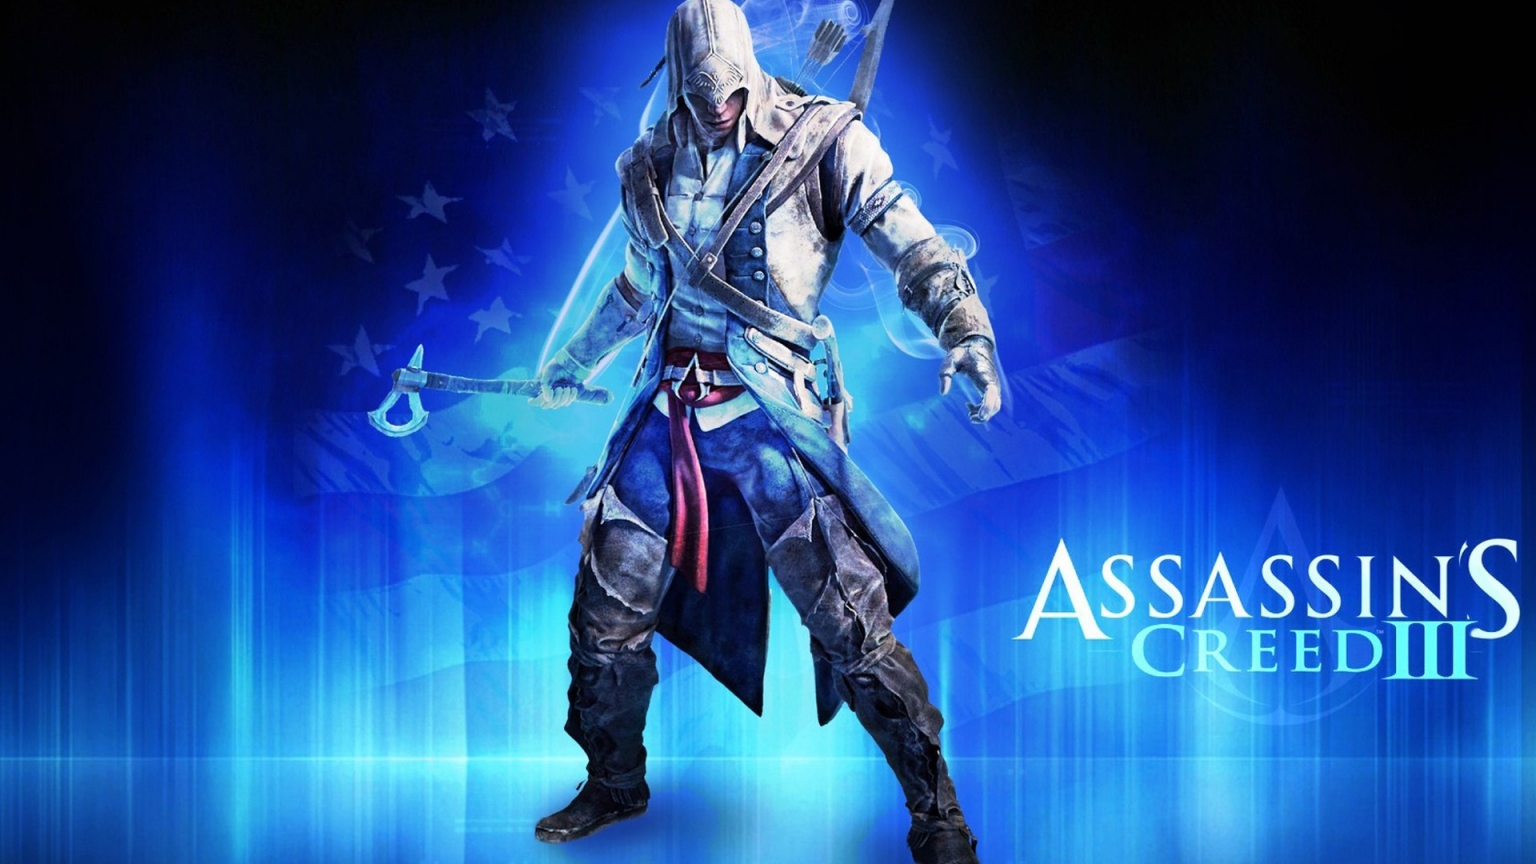 Assassin Creed III for 1536 x 864 HDTV resolution